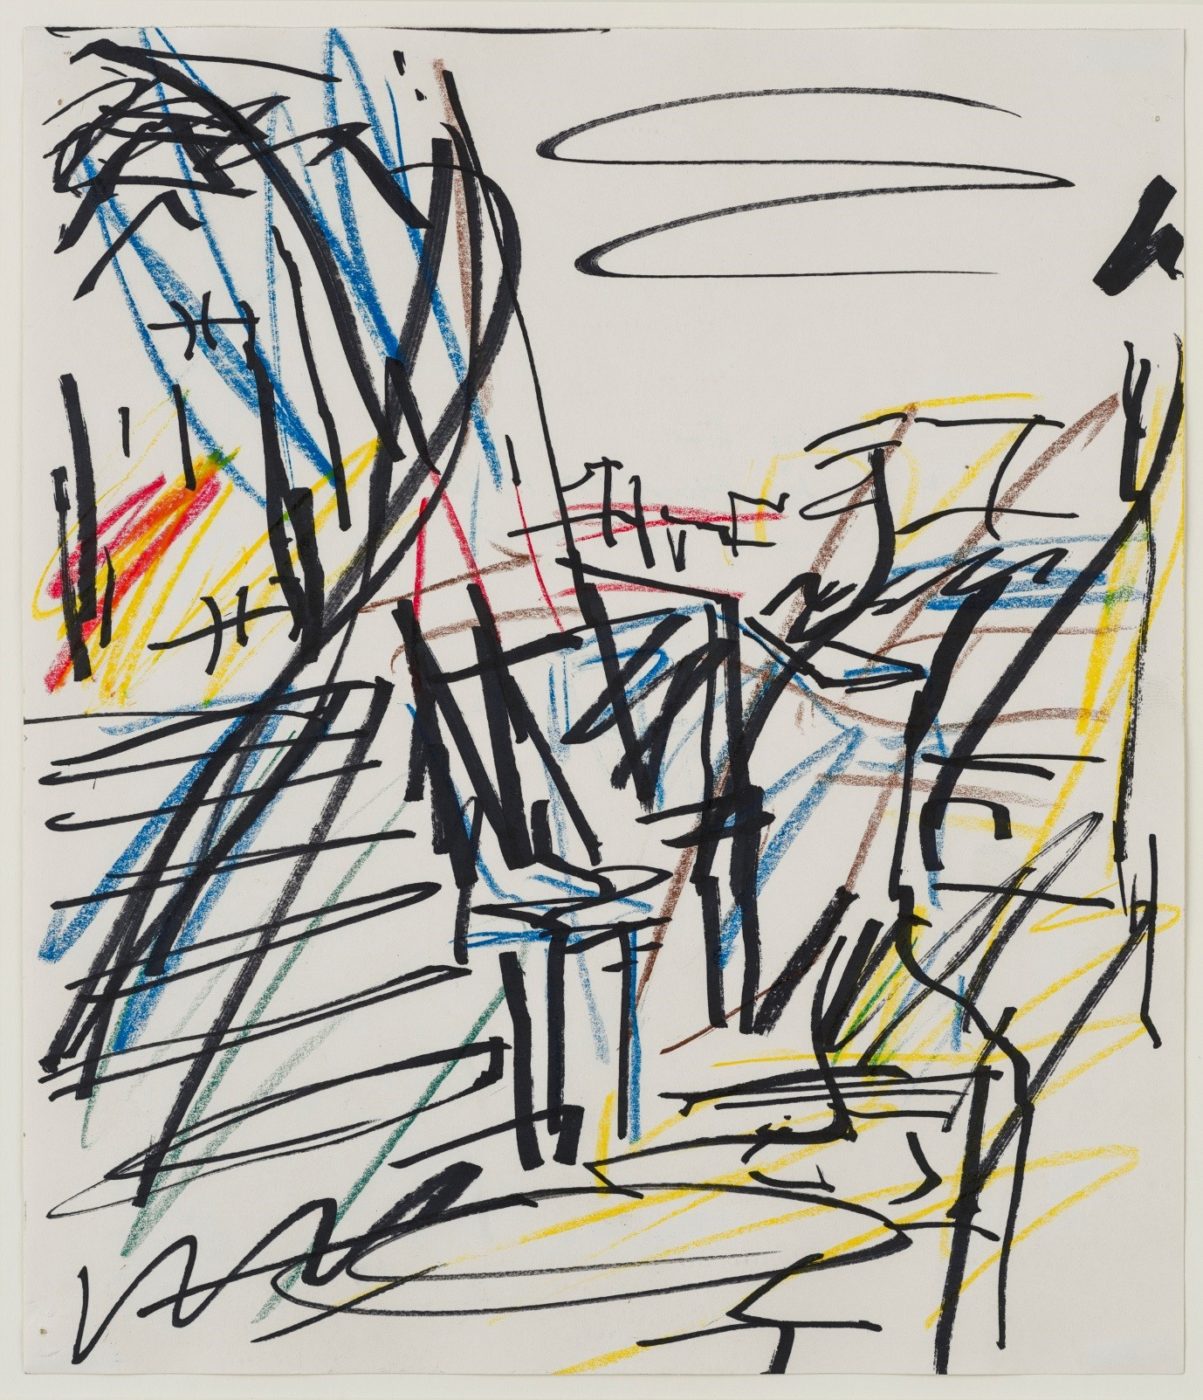 Frank Auerbach (b. 1931), Study for ‘To The Studios 1990-1991’